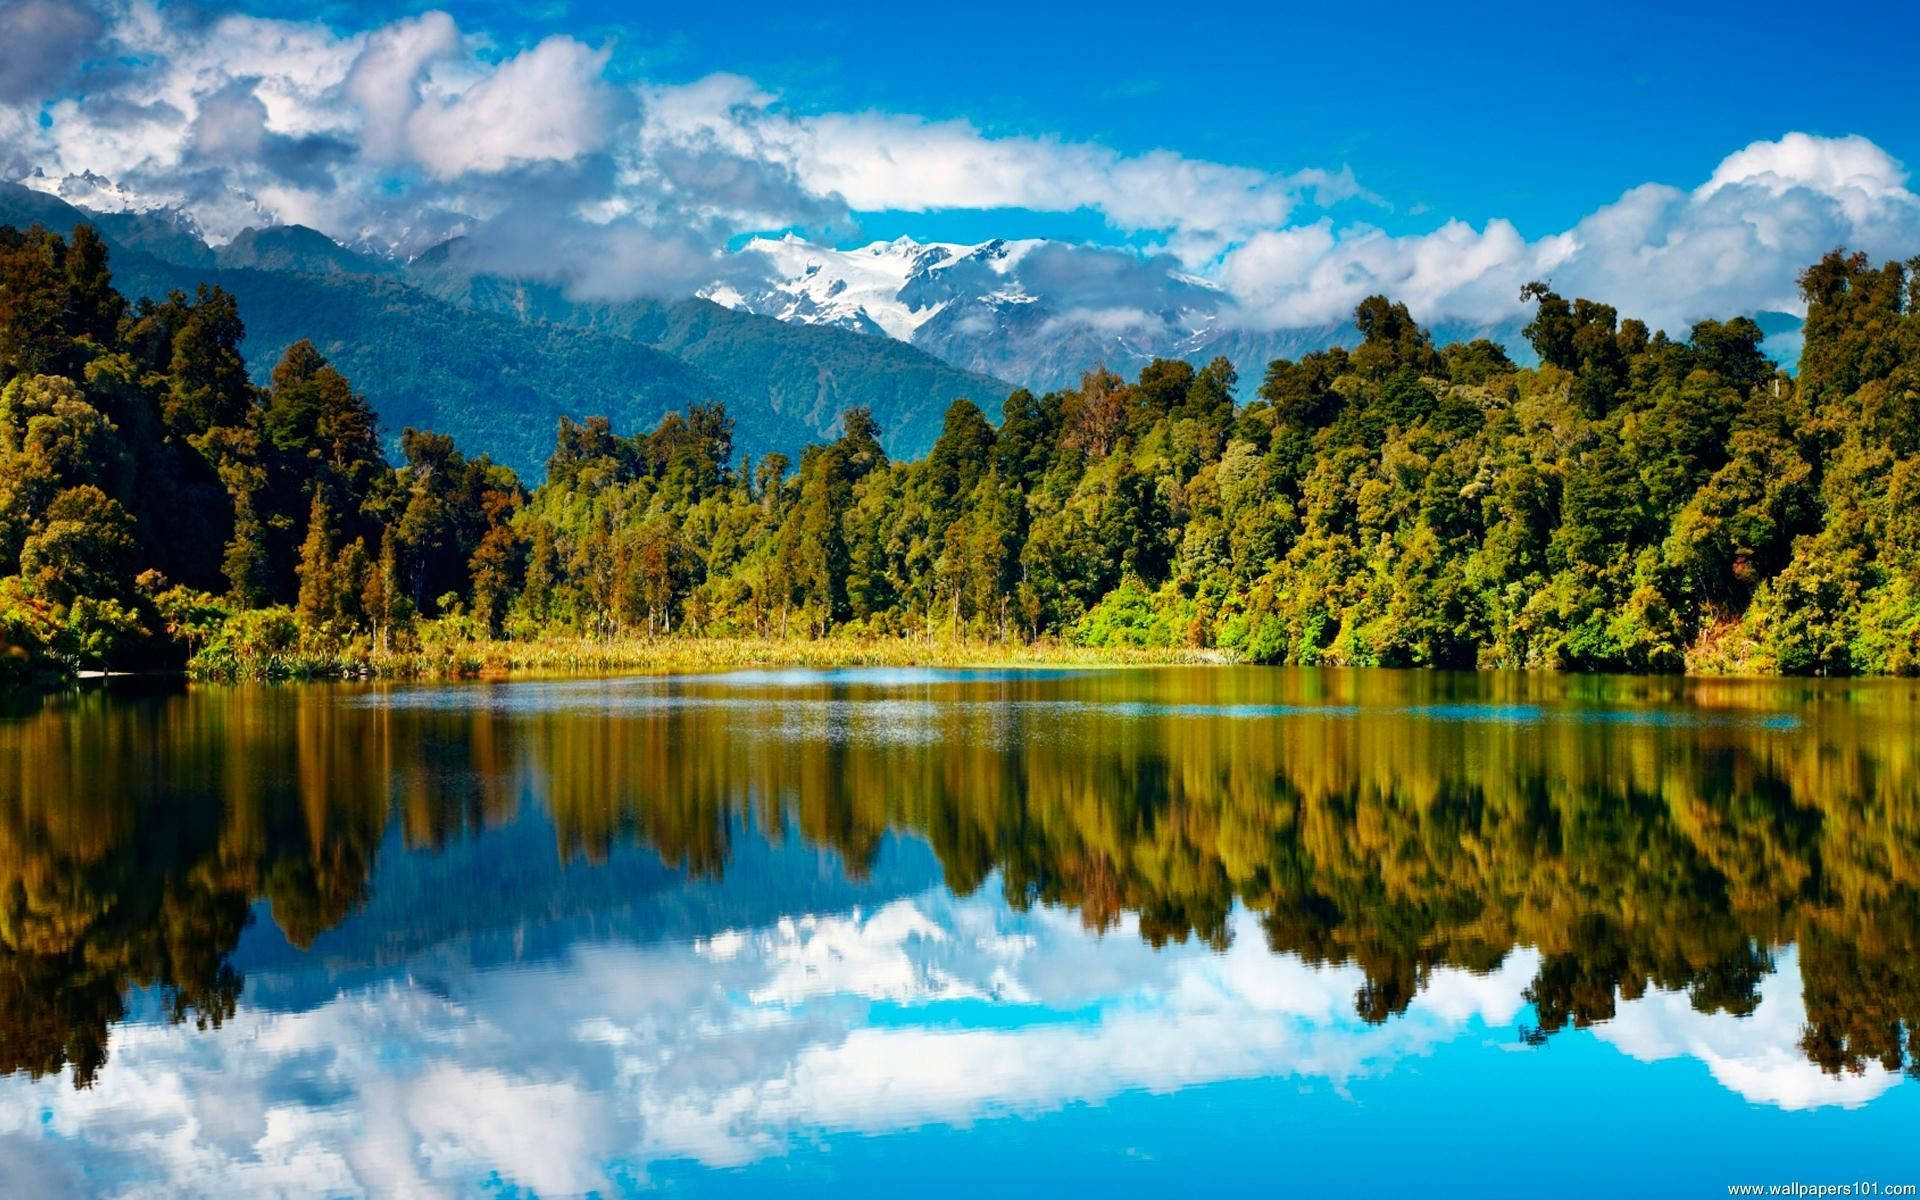 A tranquil view of nature by a calm lake and clear blue sky Wallpaper